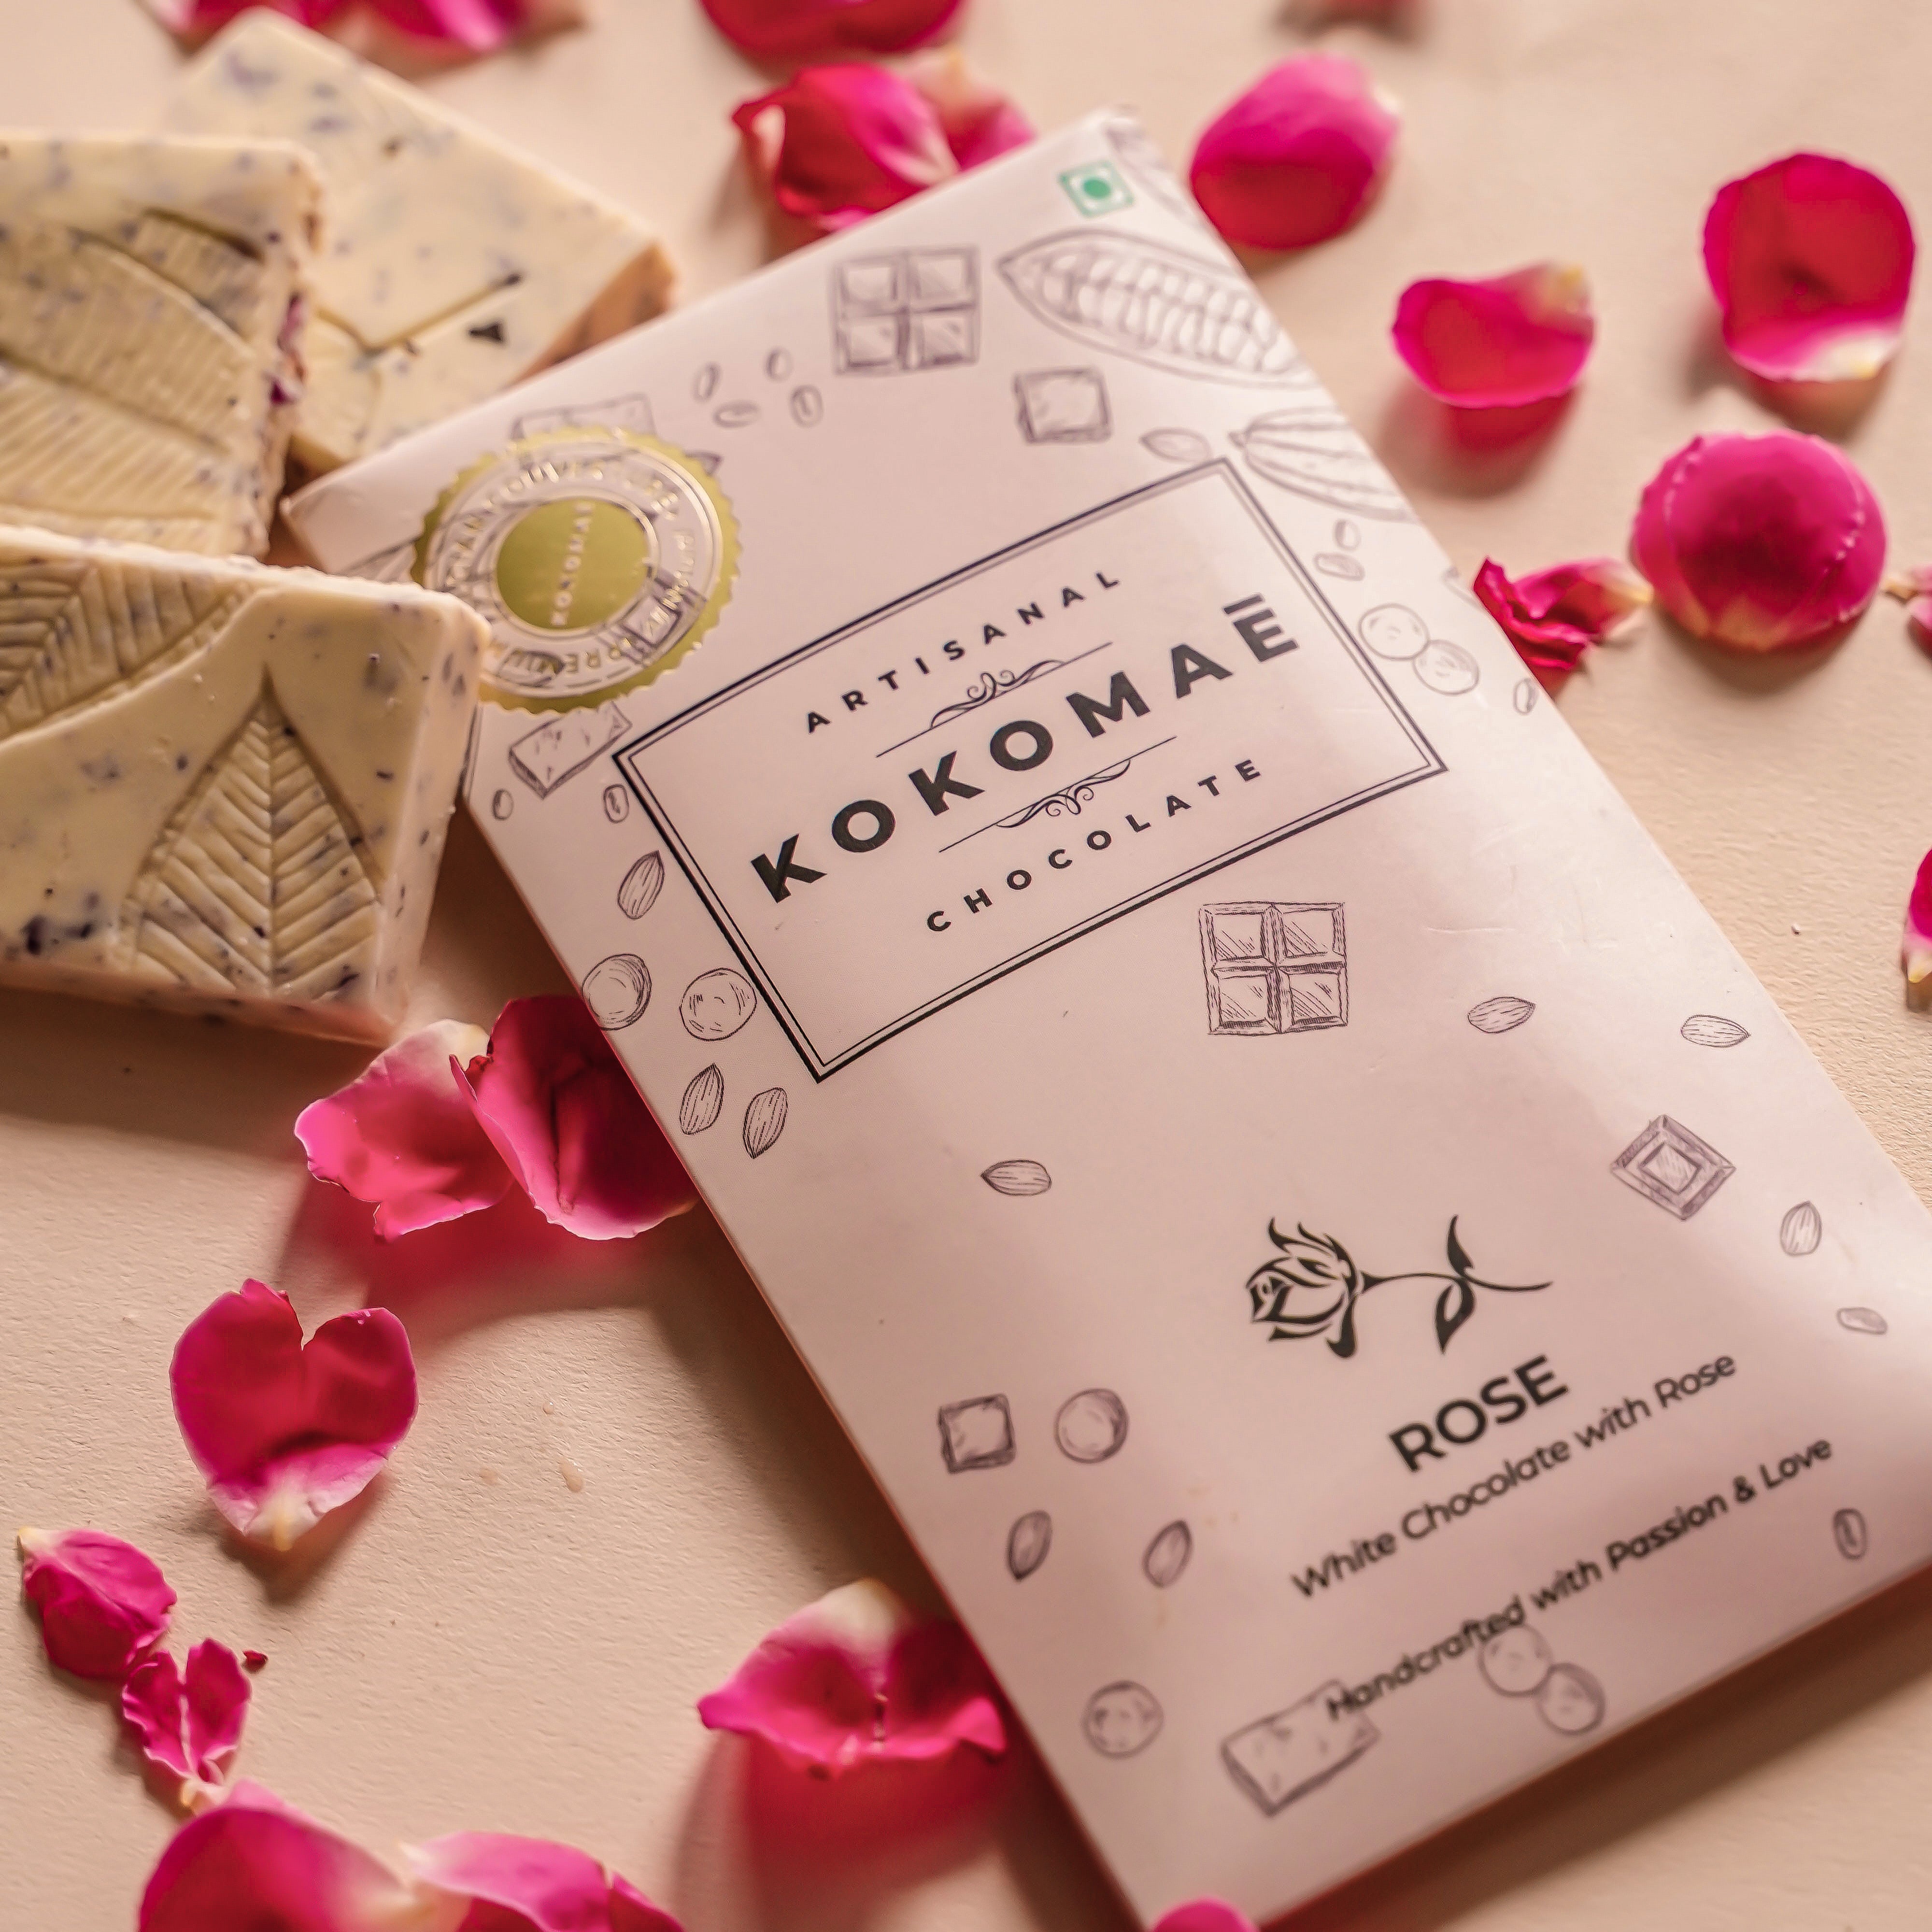 Kokomaē Premium Belgian White Chocolate Bar made from Pure Cocoa Butter with 100% Natural Rose Oil